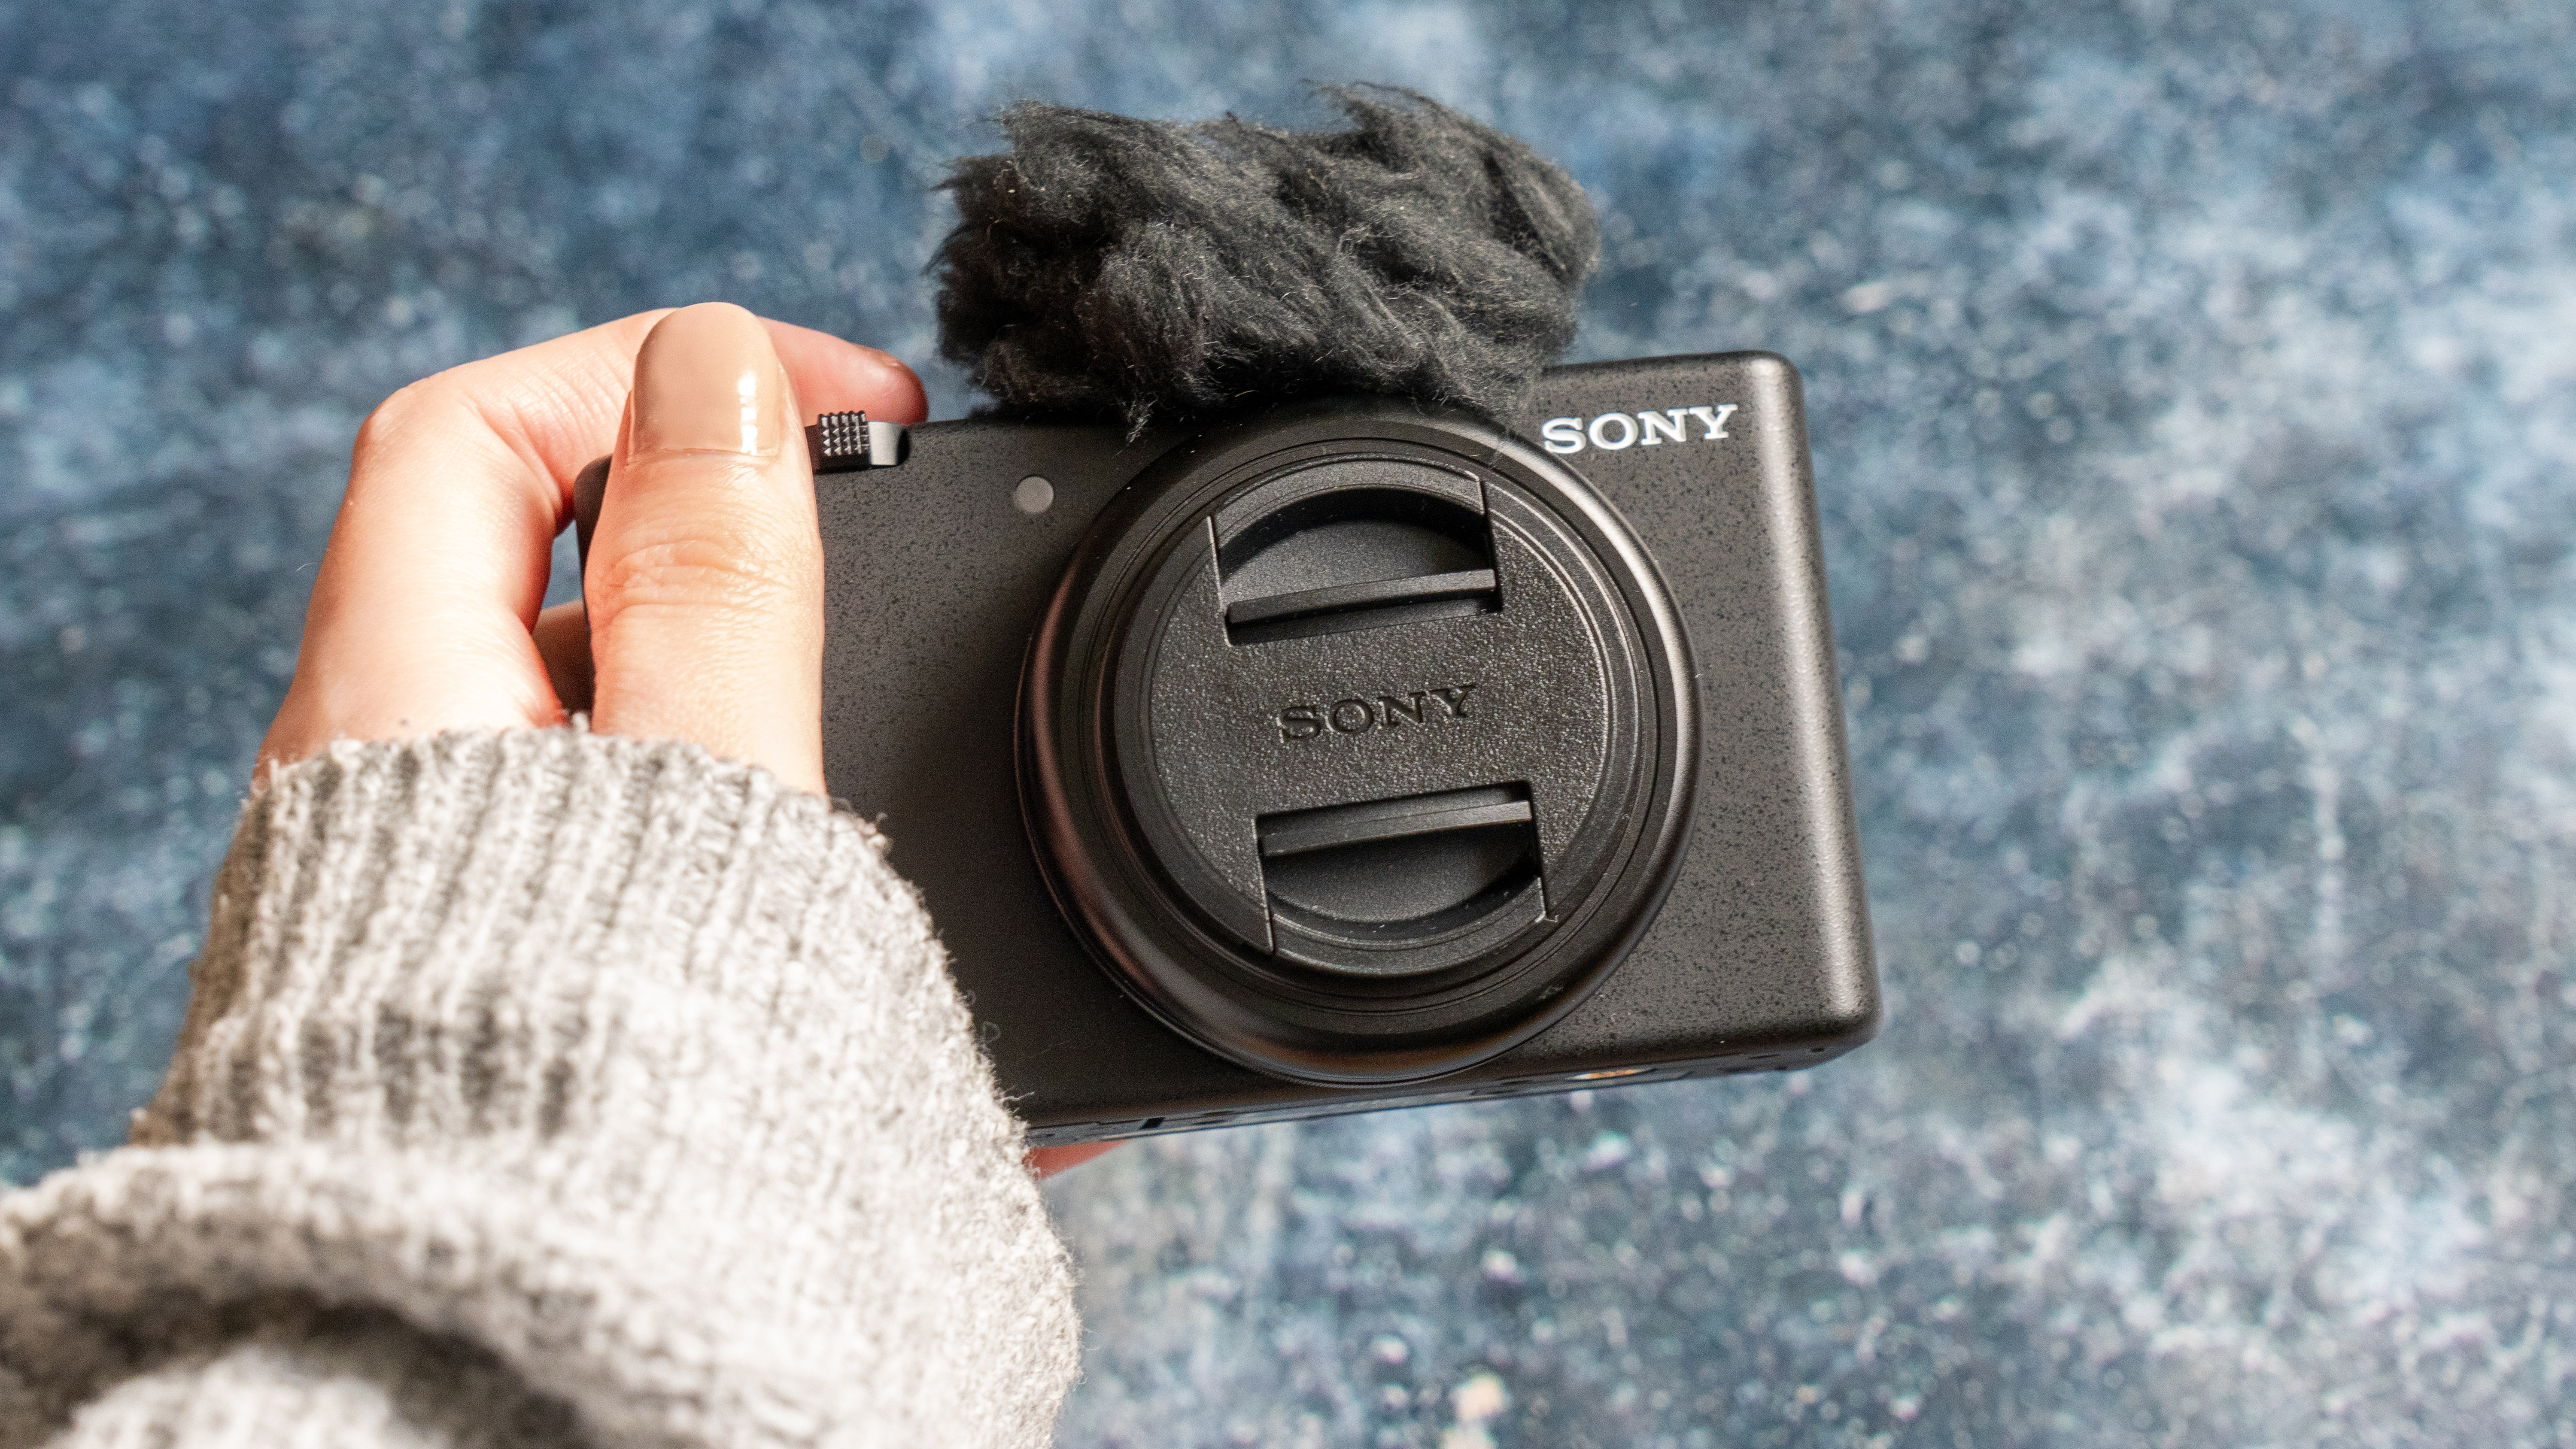 Sony ZV-F1 held in the hand